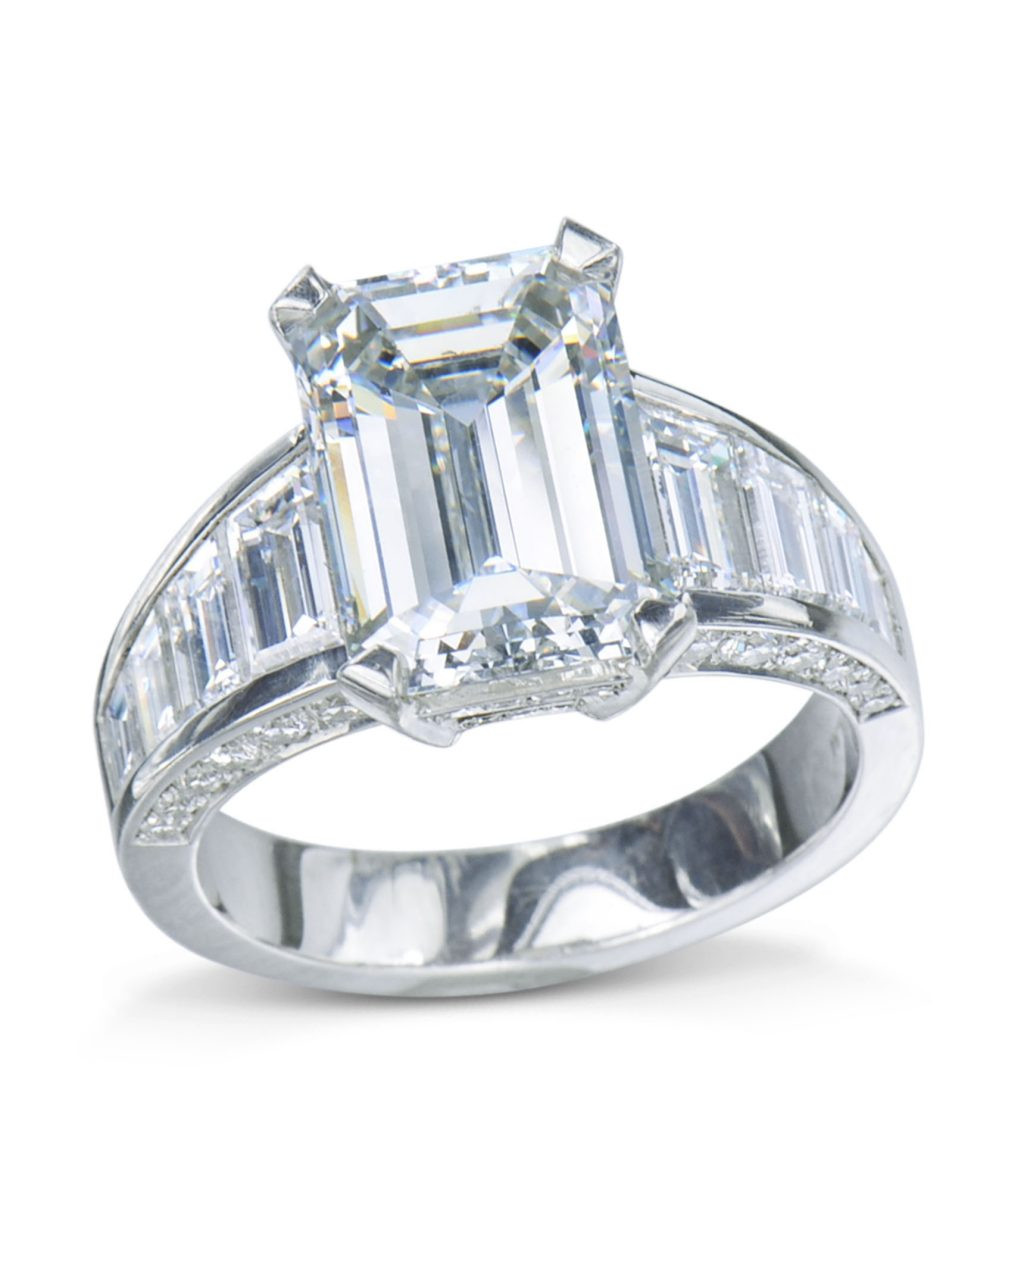 Emerald Cut Wedding Rings
 Emerald Cut with Trapezoid Diamond Engagement Ring